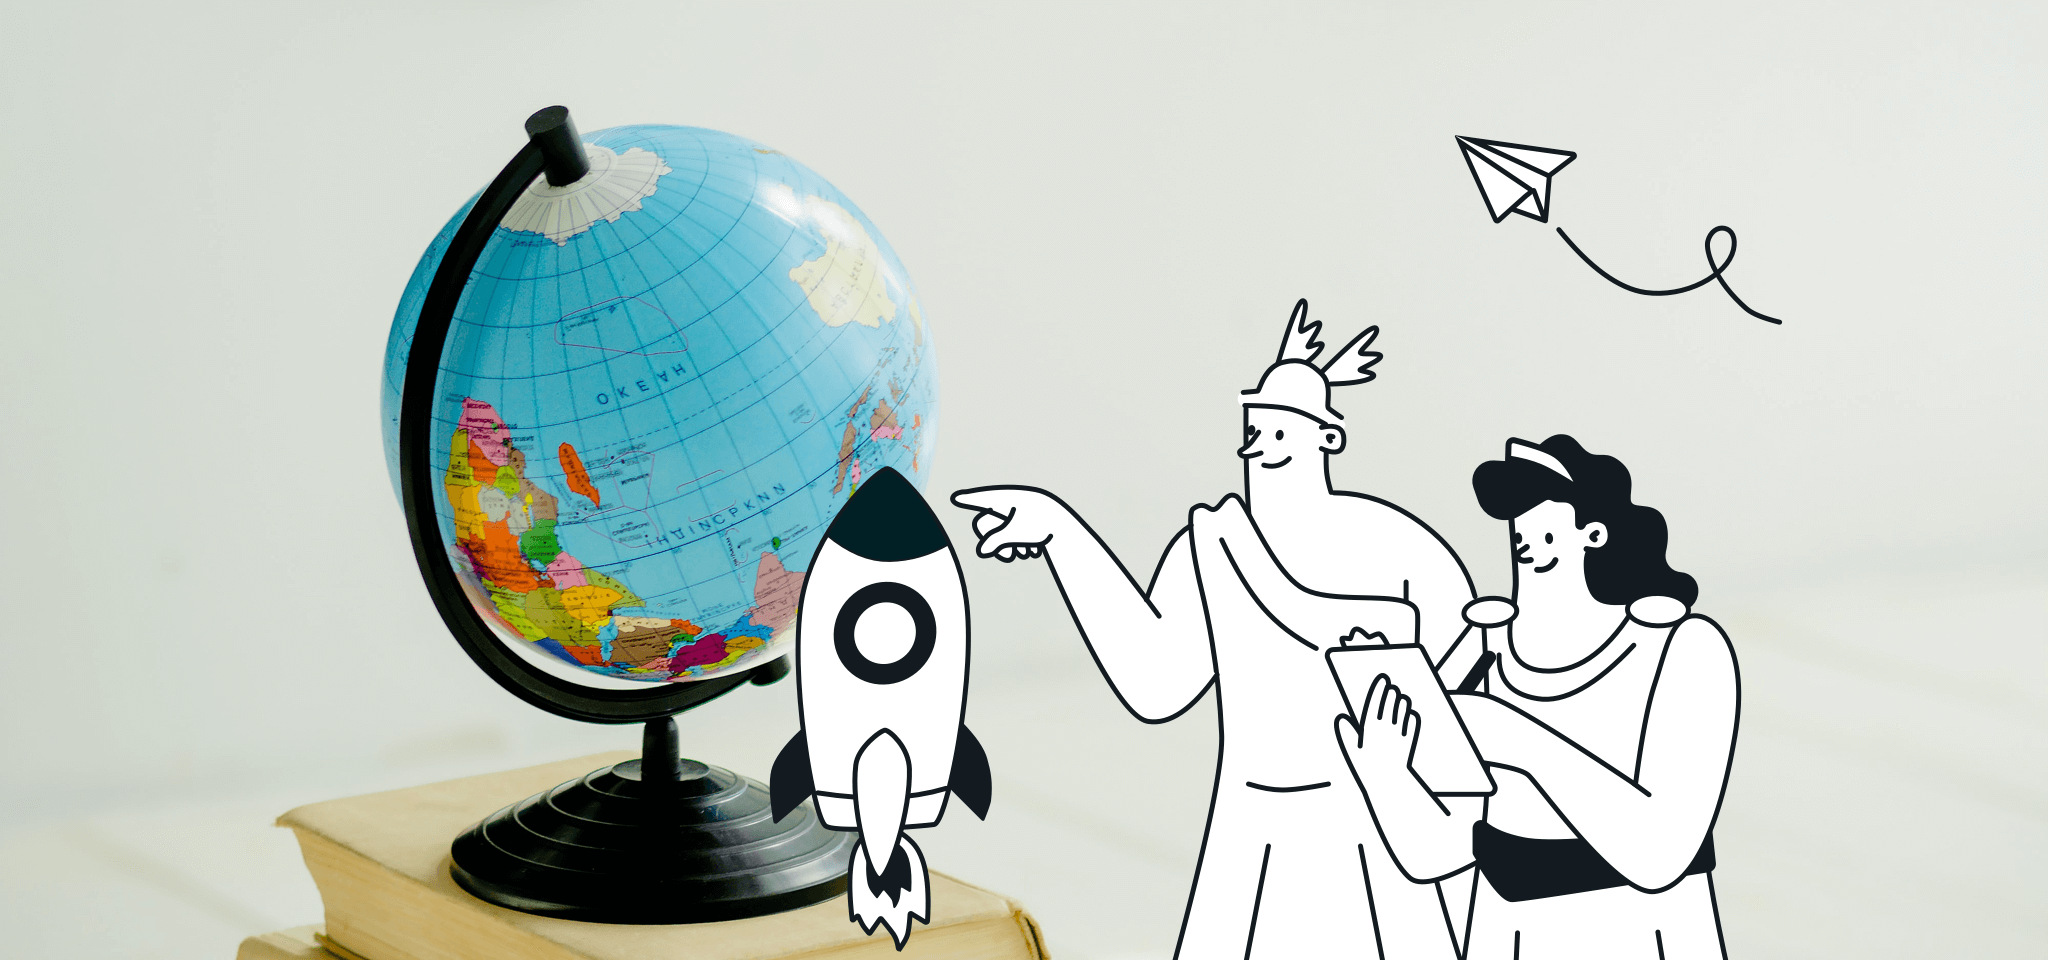 Hermes and Hera looking at the globe